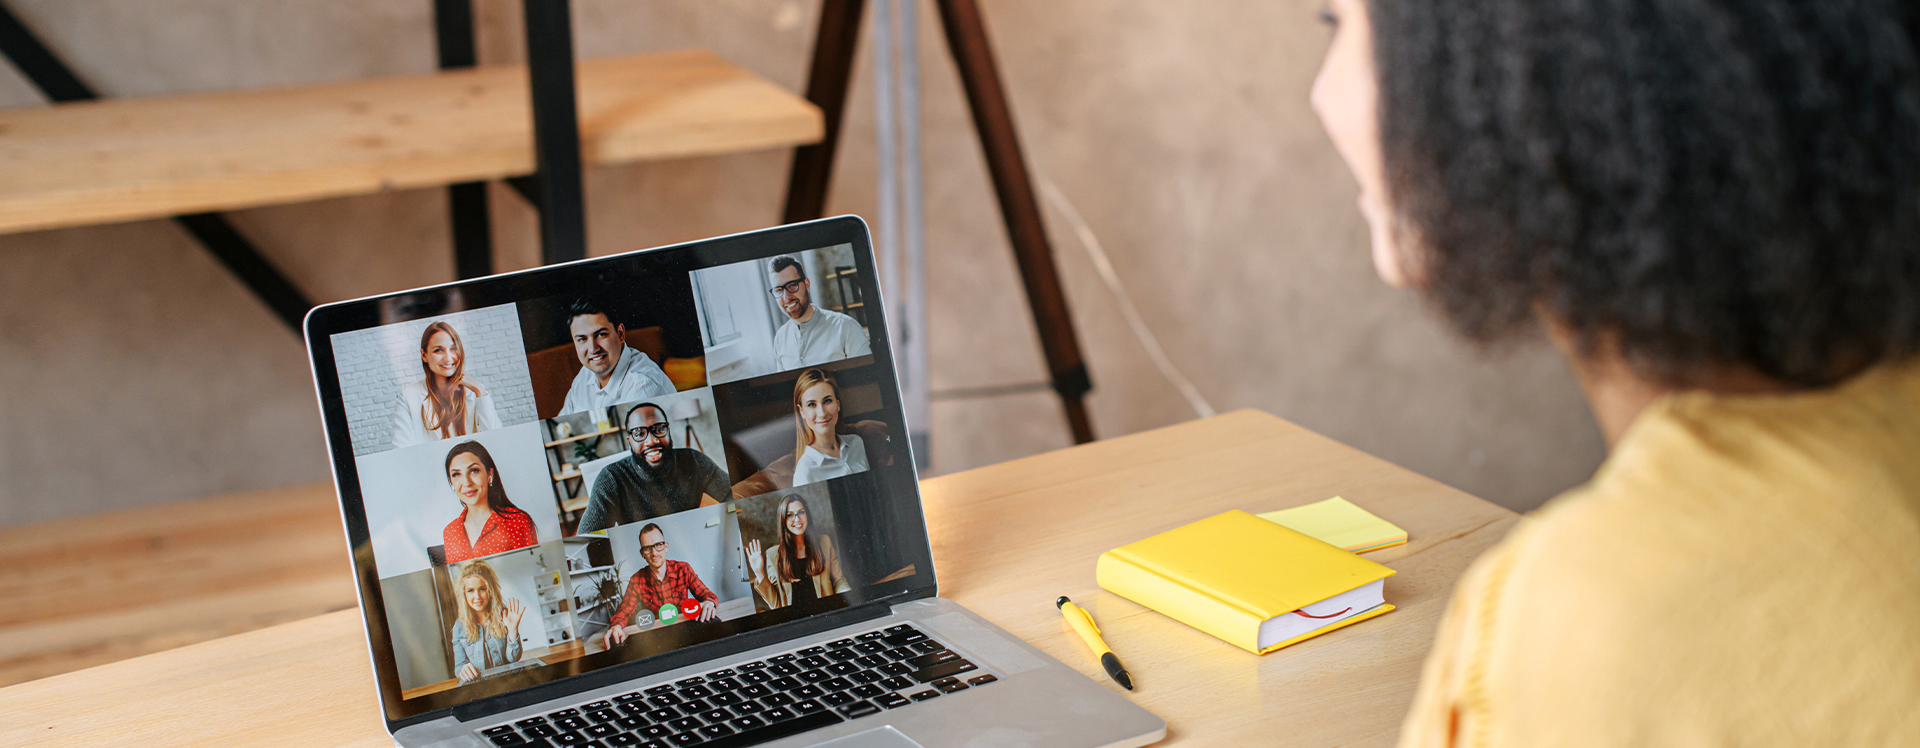 Woman in a yellow shirt sitting at a table with a laptop that has 7 colleagues on a video call.